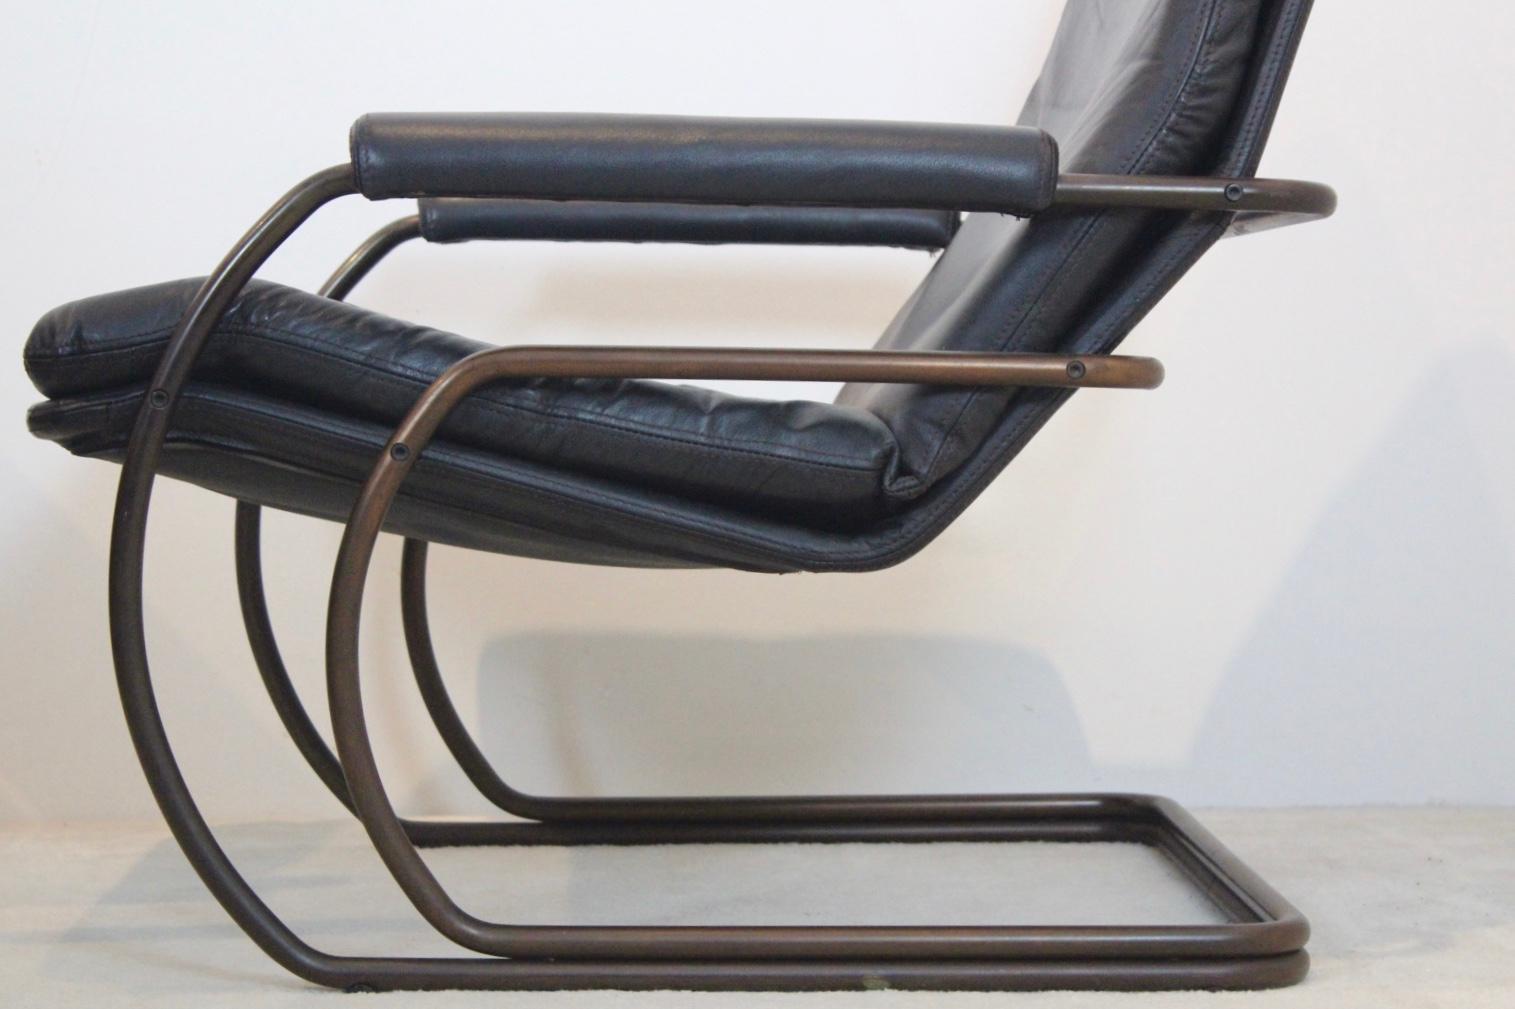 Comfortable and original Model 301 lounge chair designed by Jan des Bouvrie and manufactured by Gelderland in the Netherlands in the 1970s. In beautiful brown colored leather upholstery with matching bronze cantilever base. Upholstery is original